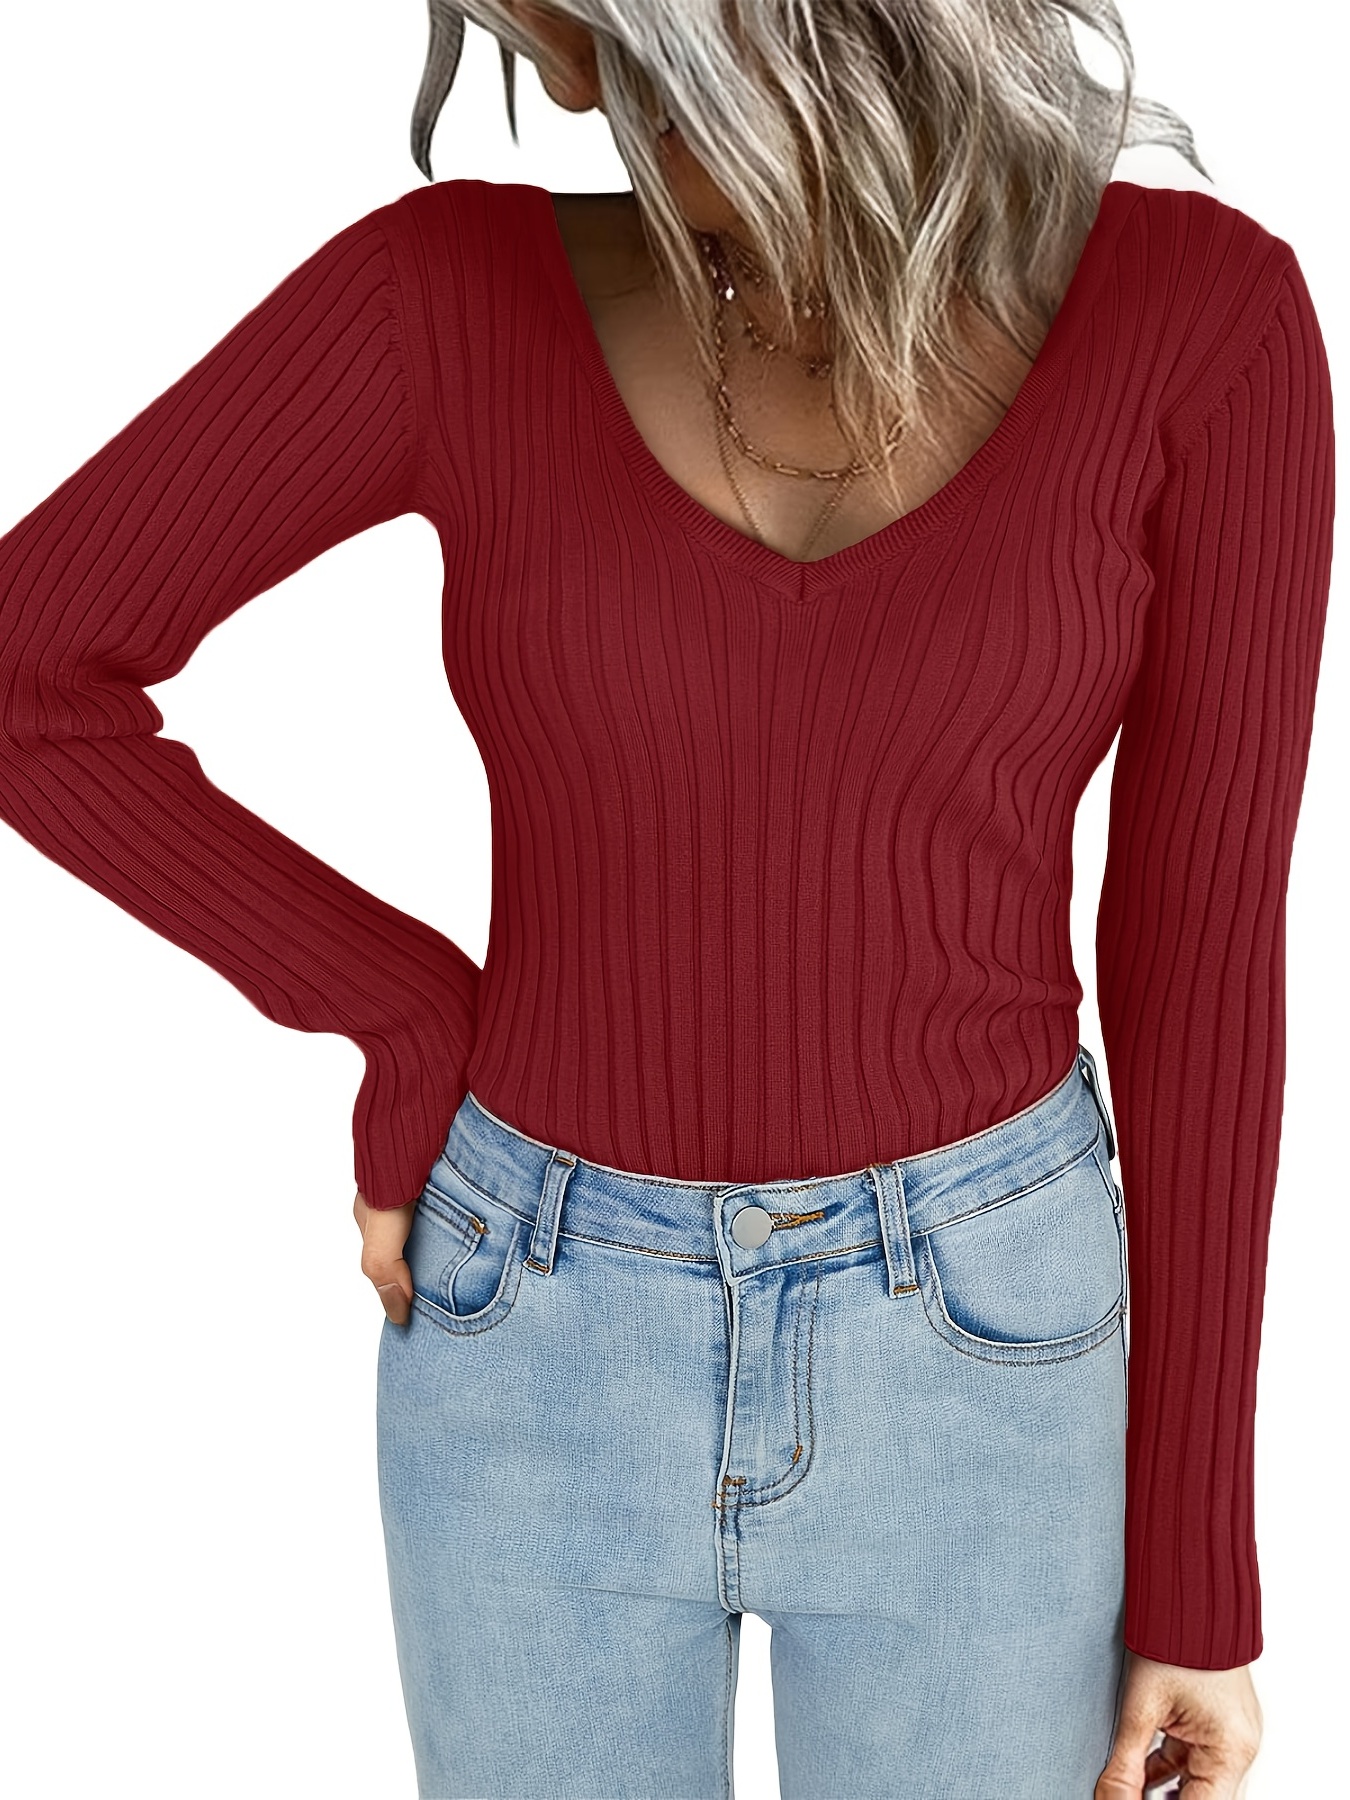 Women's Turtle Neck Ribbed Knit Sweater Long Sleeve Stretch